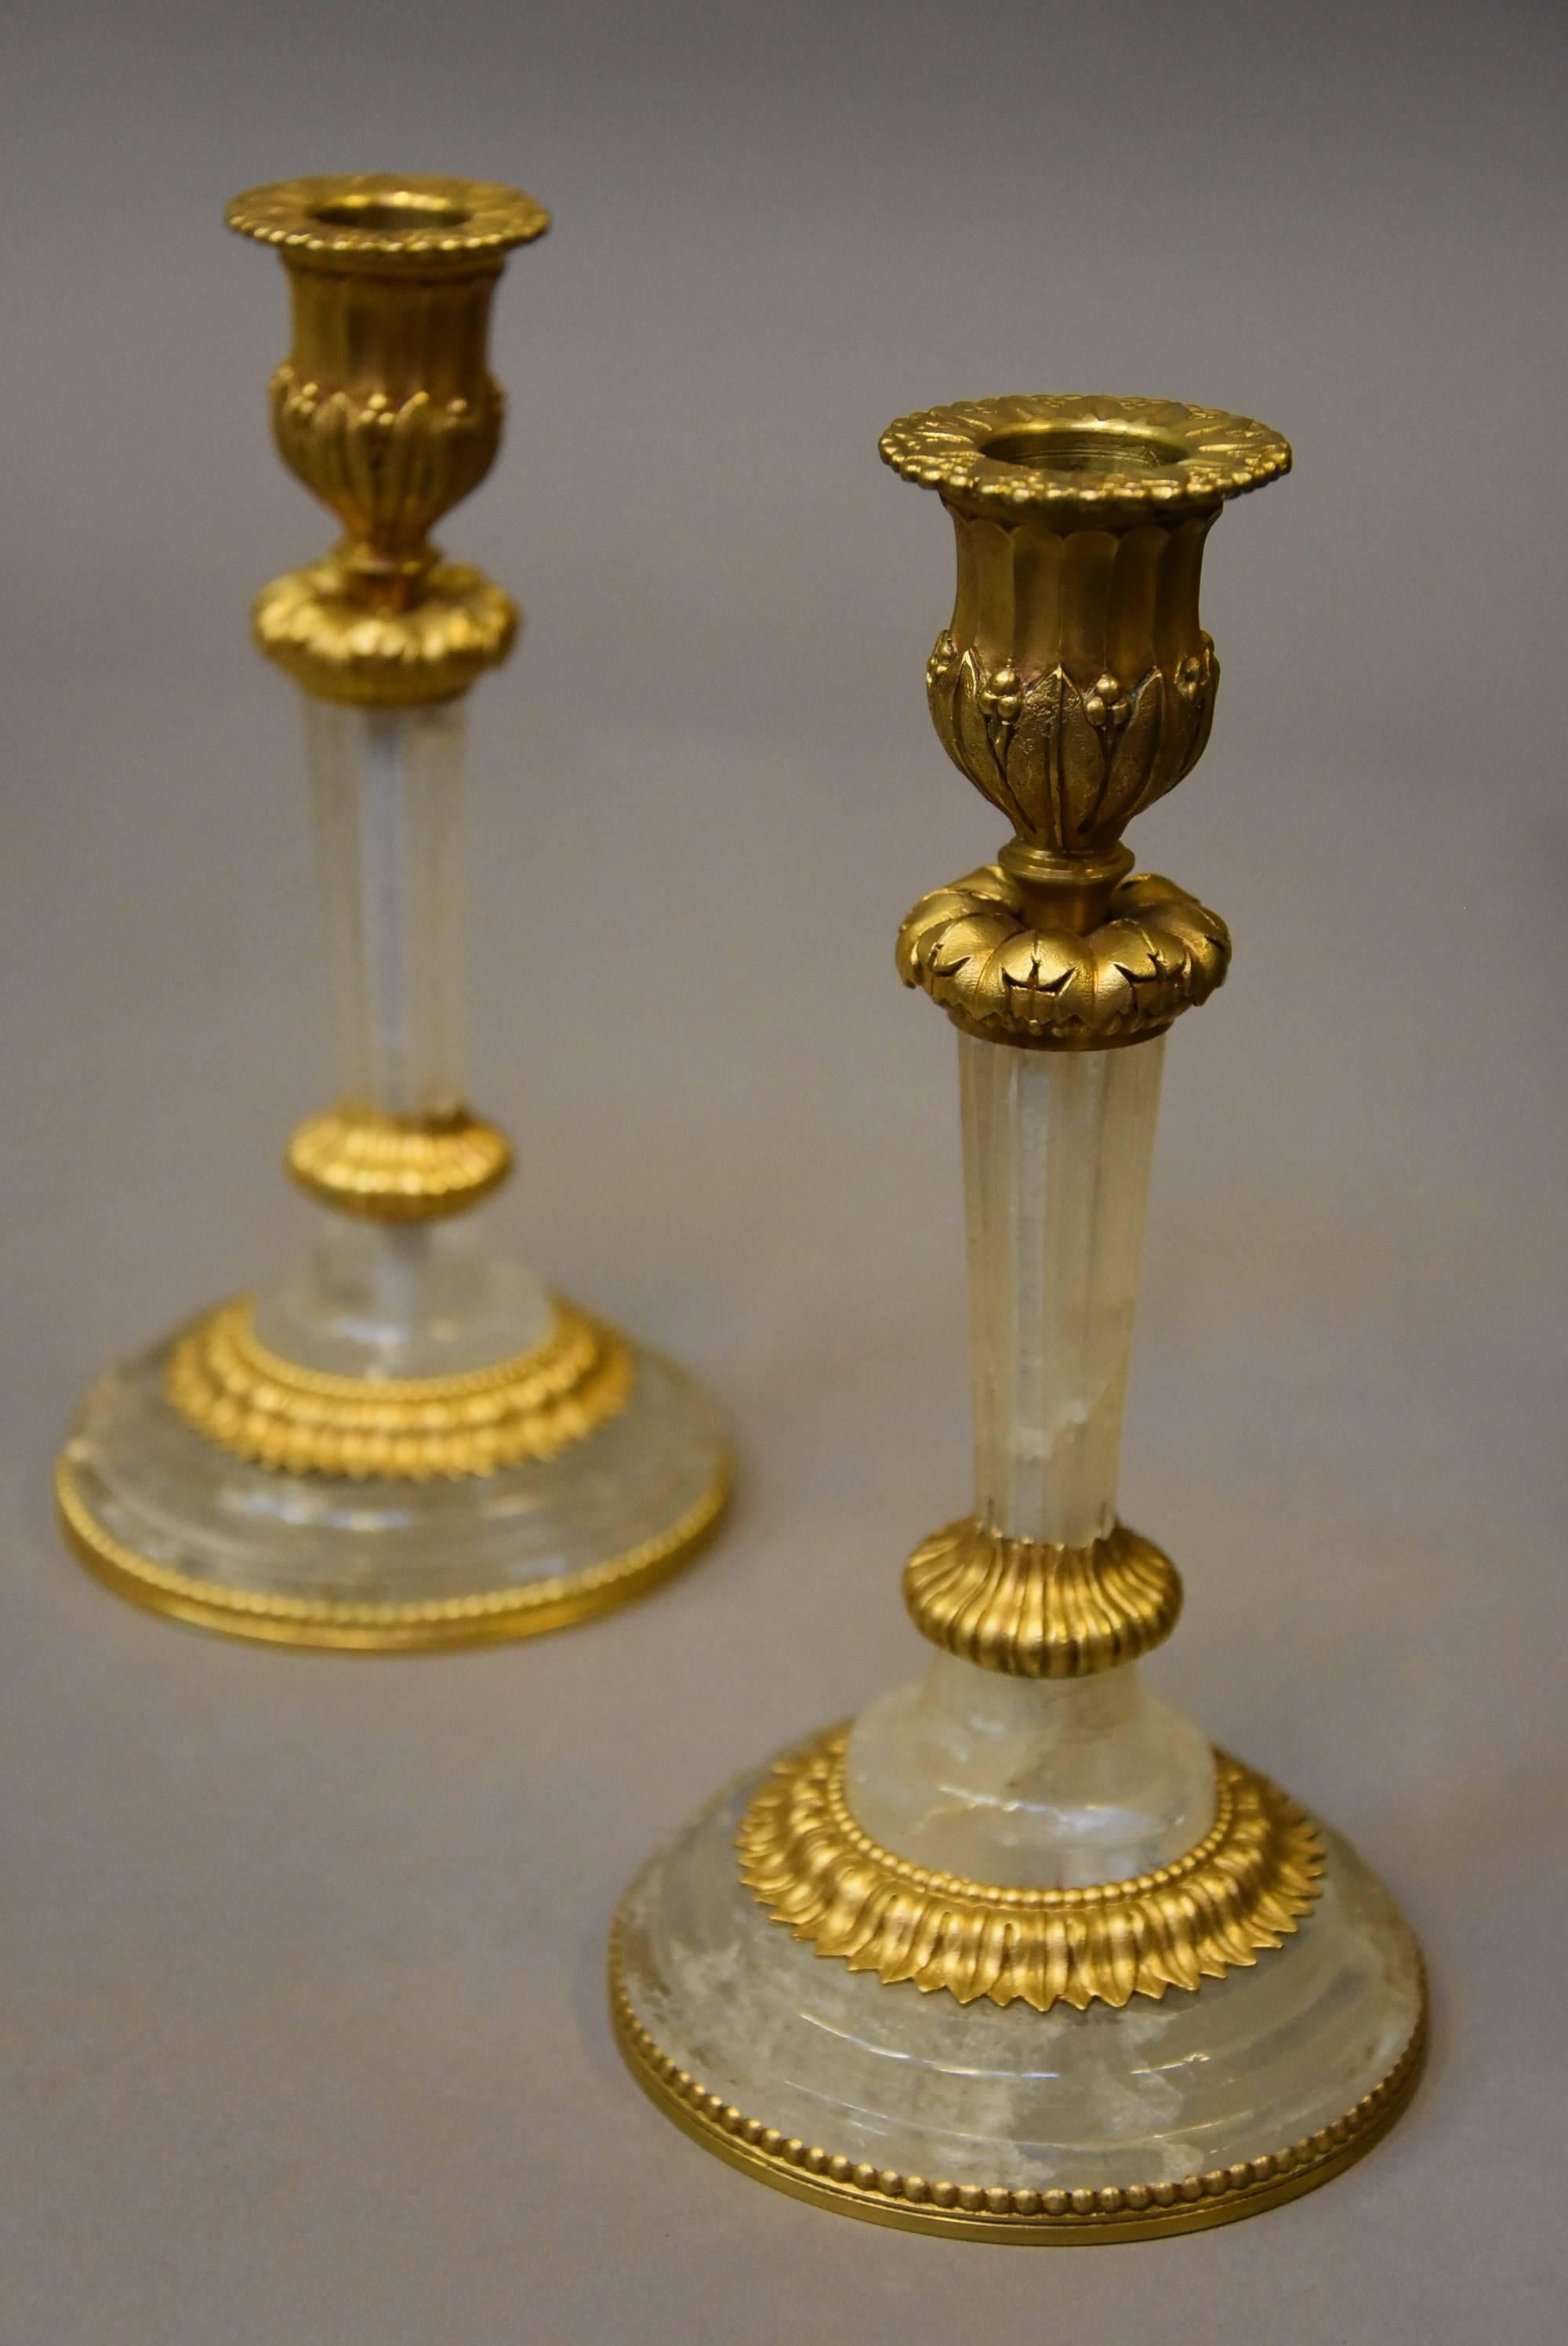 A pair of highly decorative and elegant early 20th century rock crystal and ormolu candlesticks, probably French.

These candlesticks consist of ormolu candle holders with foliate decoration leading down to tapering rock crystal stems with foliate